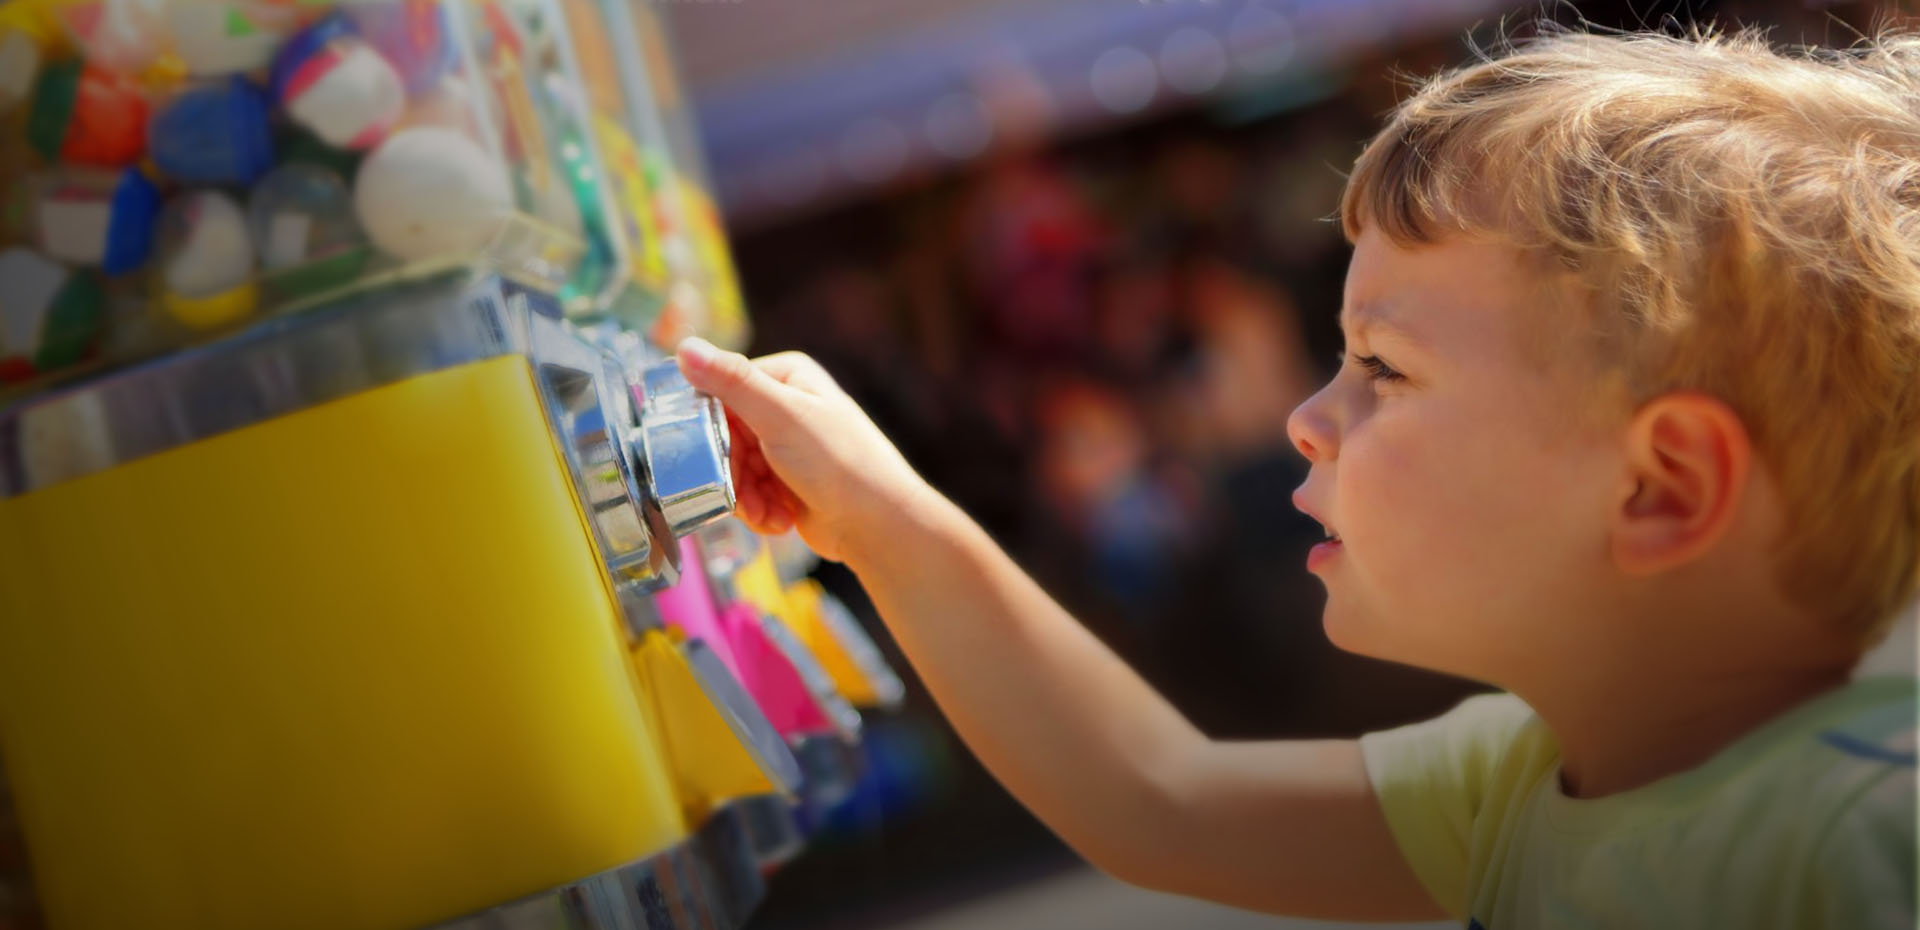 Installers Of Toys Vending Machines For Pubs East Midlands